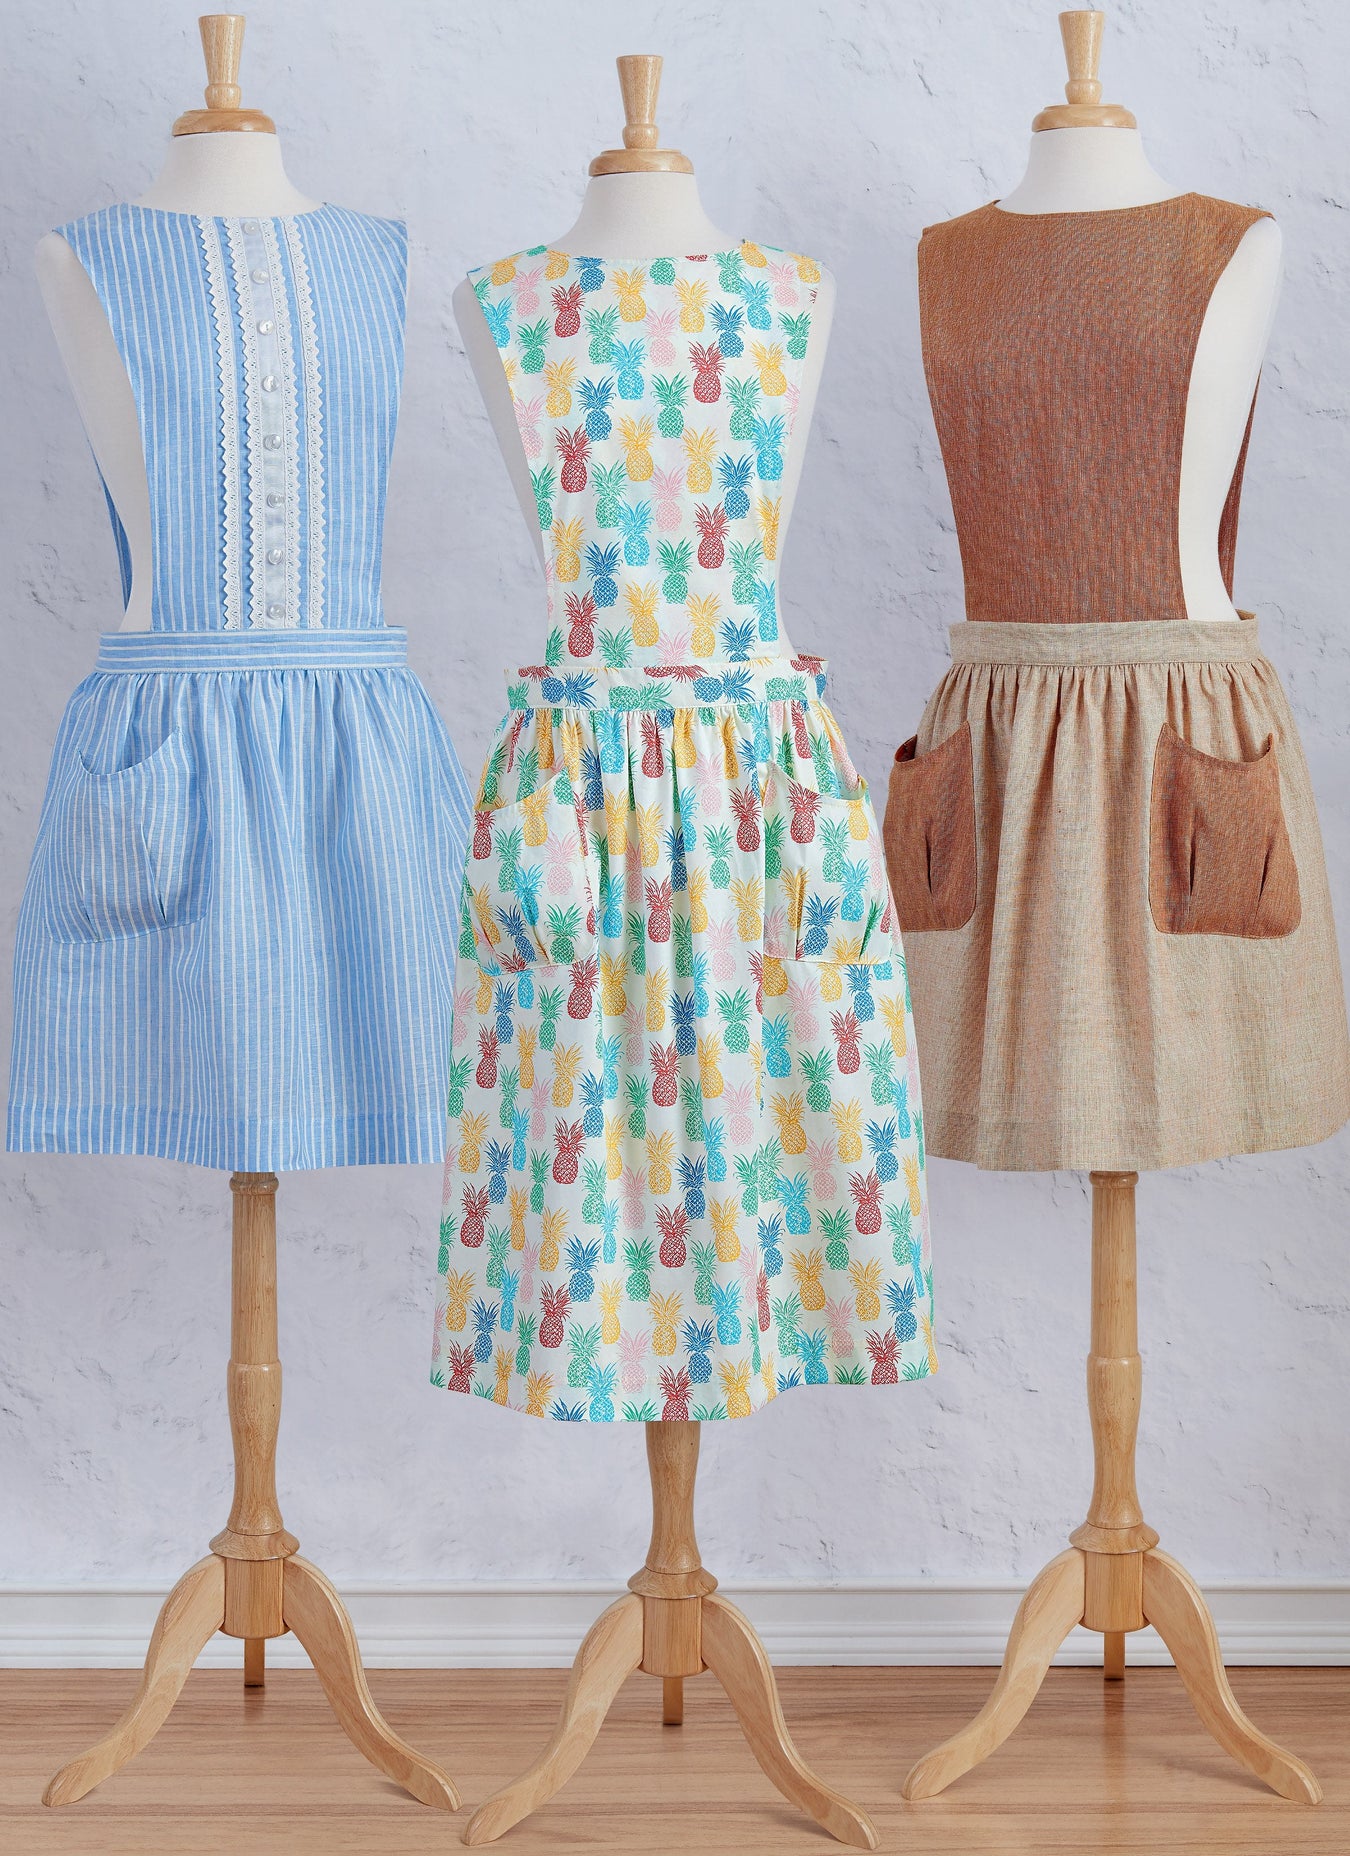 Shop sewing patterns for Aprons at Jaycotts